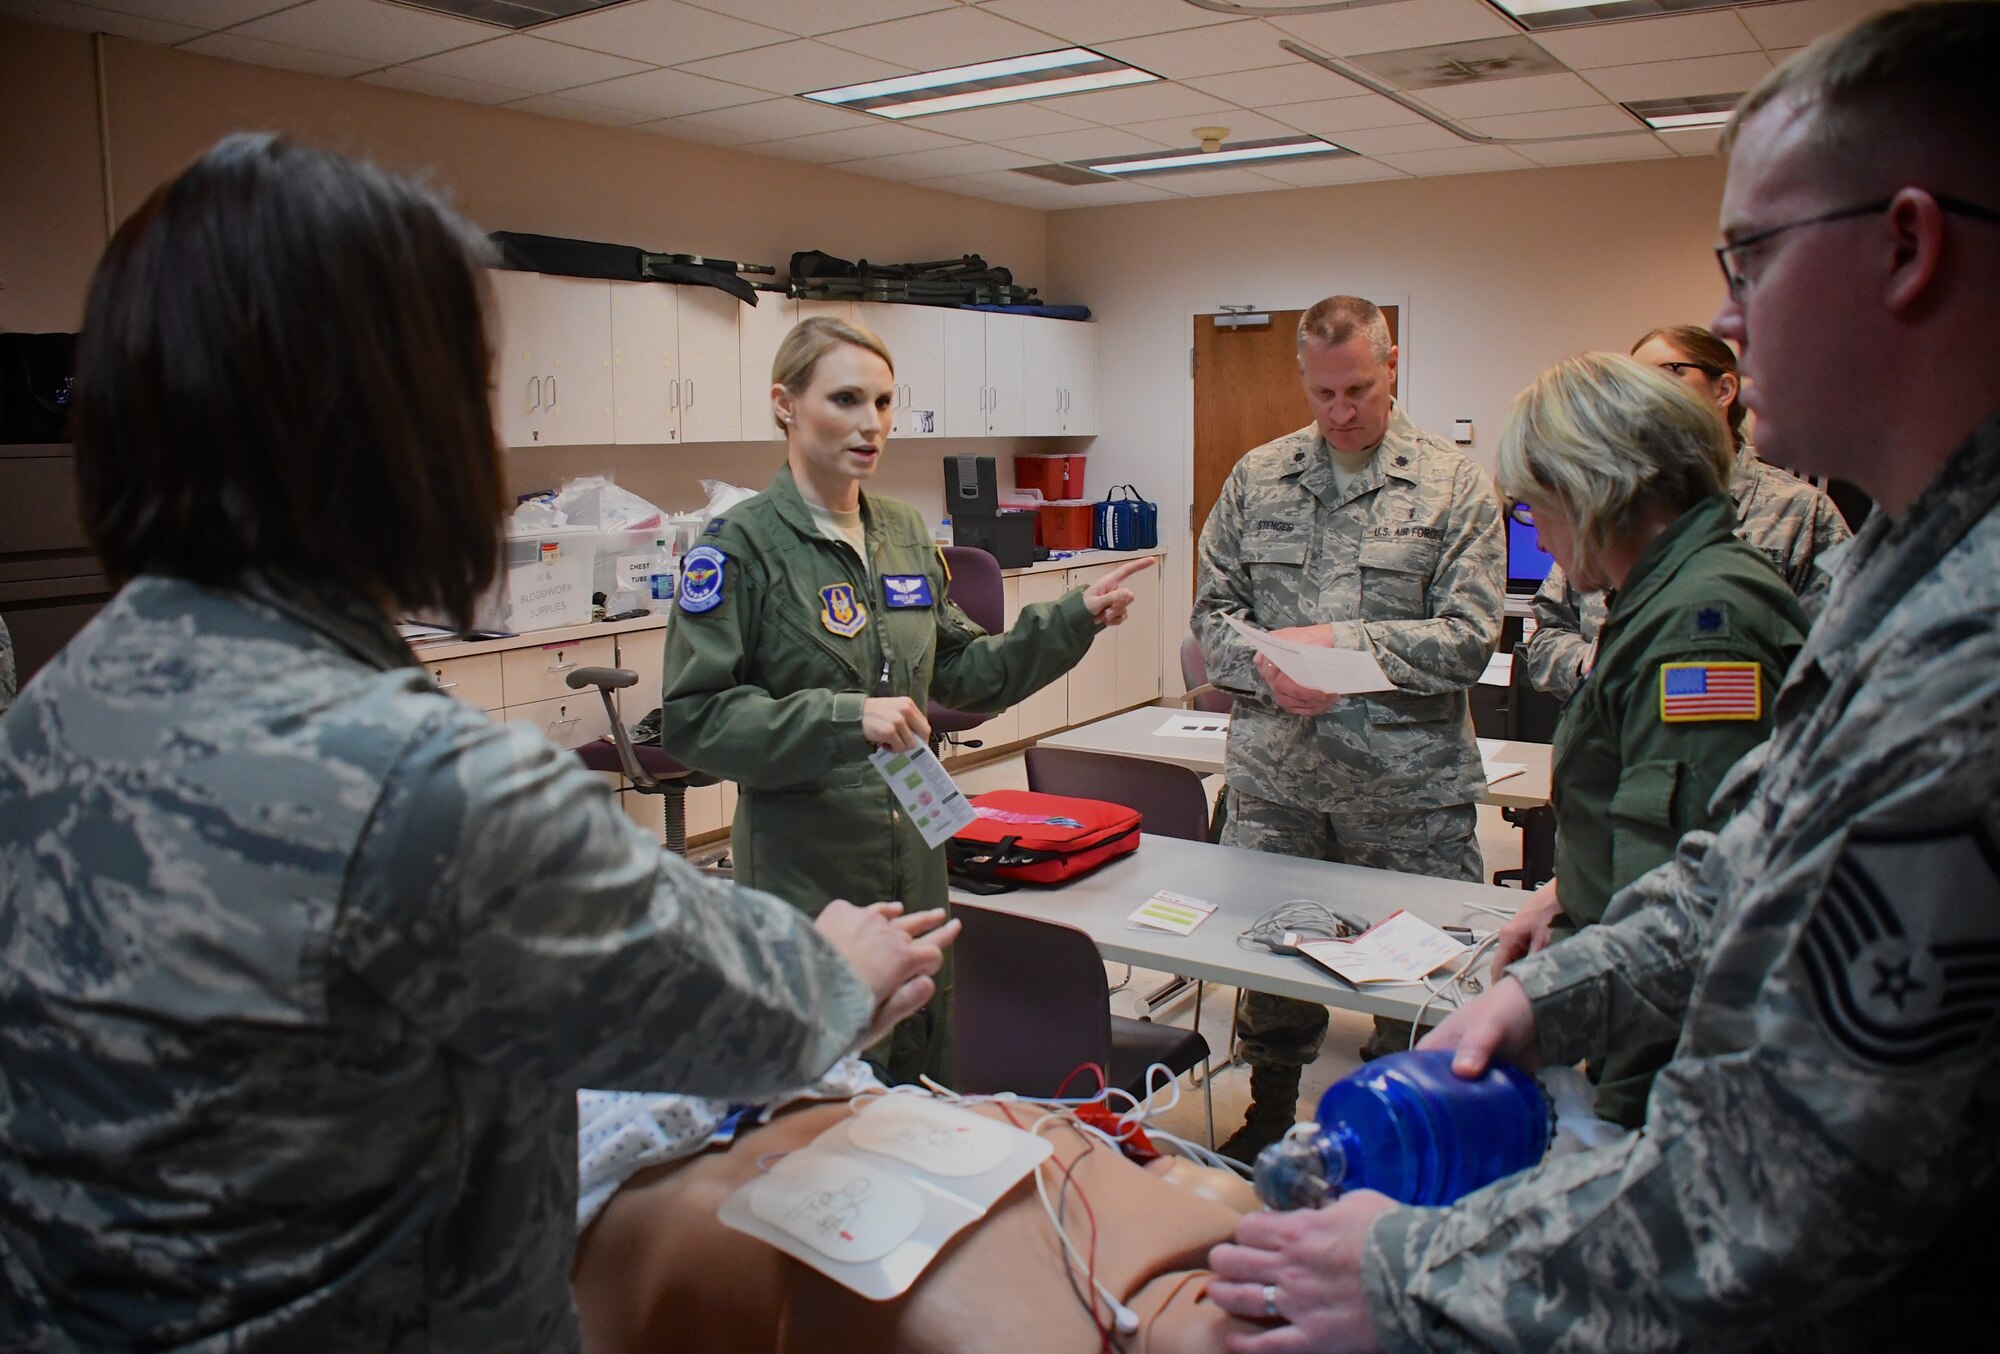 Capt. Jessica Emory, 932nd Aeromedical Evacuation Squadron, and Lt. Col. James Stenger of the 932nd Medical Squadron, give directions and discuss various medical procedures from their unique backgrounds in both military and community work. Members of the 932nd Airlift Wing participated in medical refresher courses March 4, 2018, at Scott Air Force Base, Ill. During this particular class, medical teams from the 932nd Medical Group and 932nd Aeromedical Evacuation Squadron worked in a training area using a simulated (robotic) patient to check vital signs electronically. The training emphasized the breadth of skills necessary to run through checklists, communicate to each person what their role is, and use teamwork to save lives.  (U.S. Air Force photo by Lt. Col. Stan Paregien)